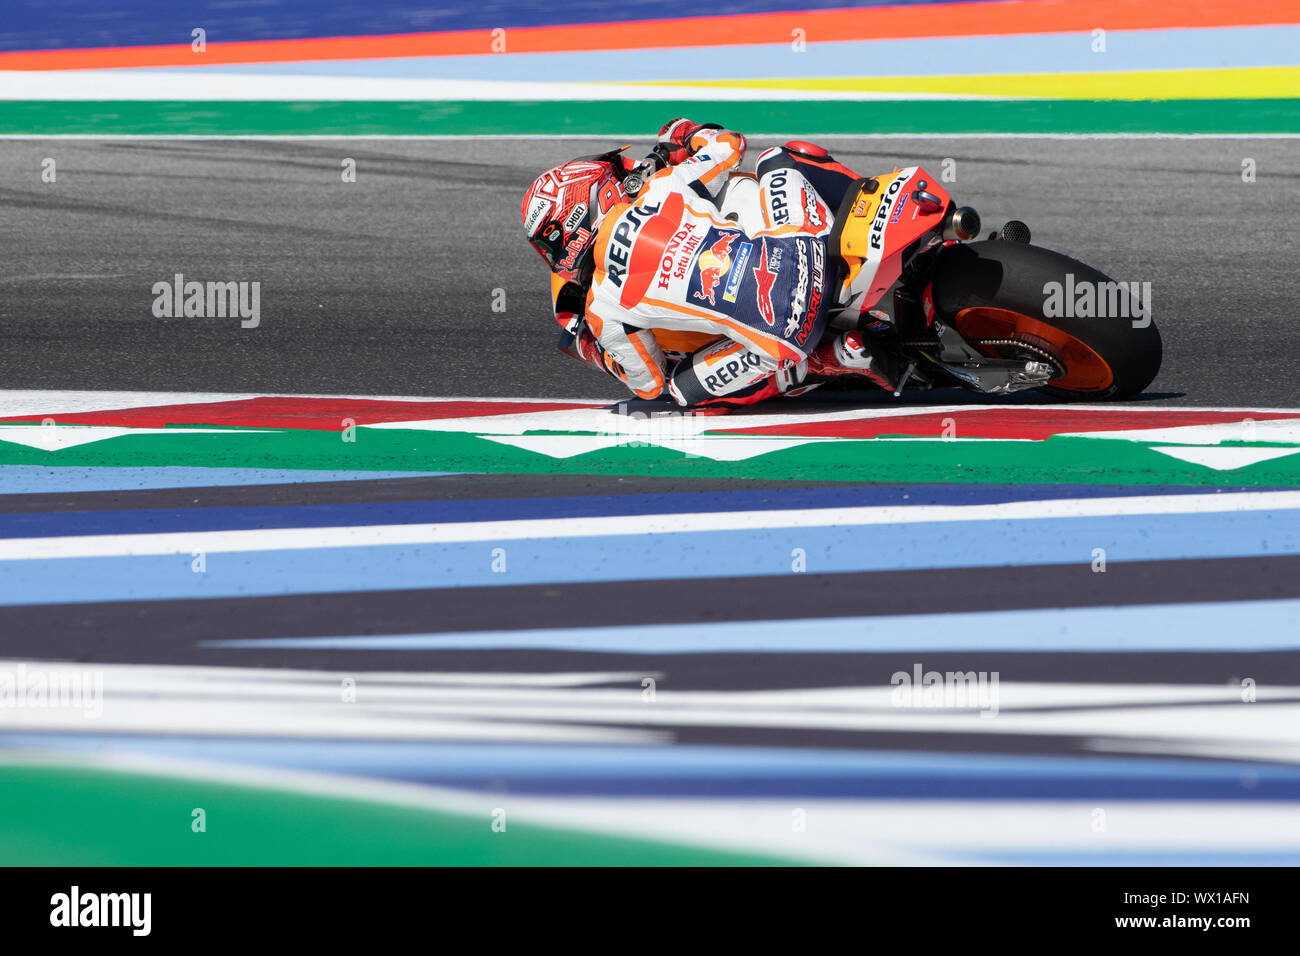 MARC MARQUEZ, SPANISH RIDER AND MOTOGP WORLD CHAMPION WITH NUMBER 93 FOR REPSOL HONDA TEAM  during Saturday Free Practice & Qualifications Of The Moto Stock Photo